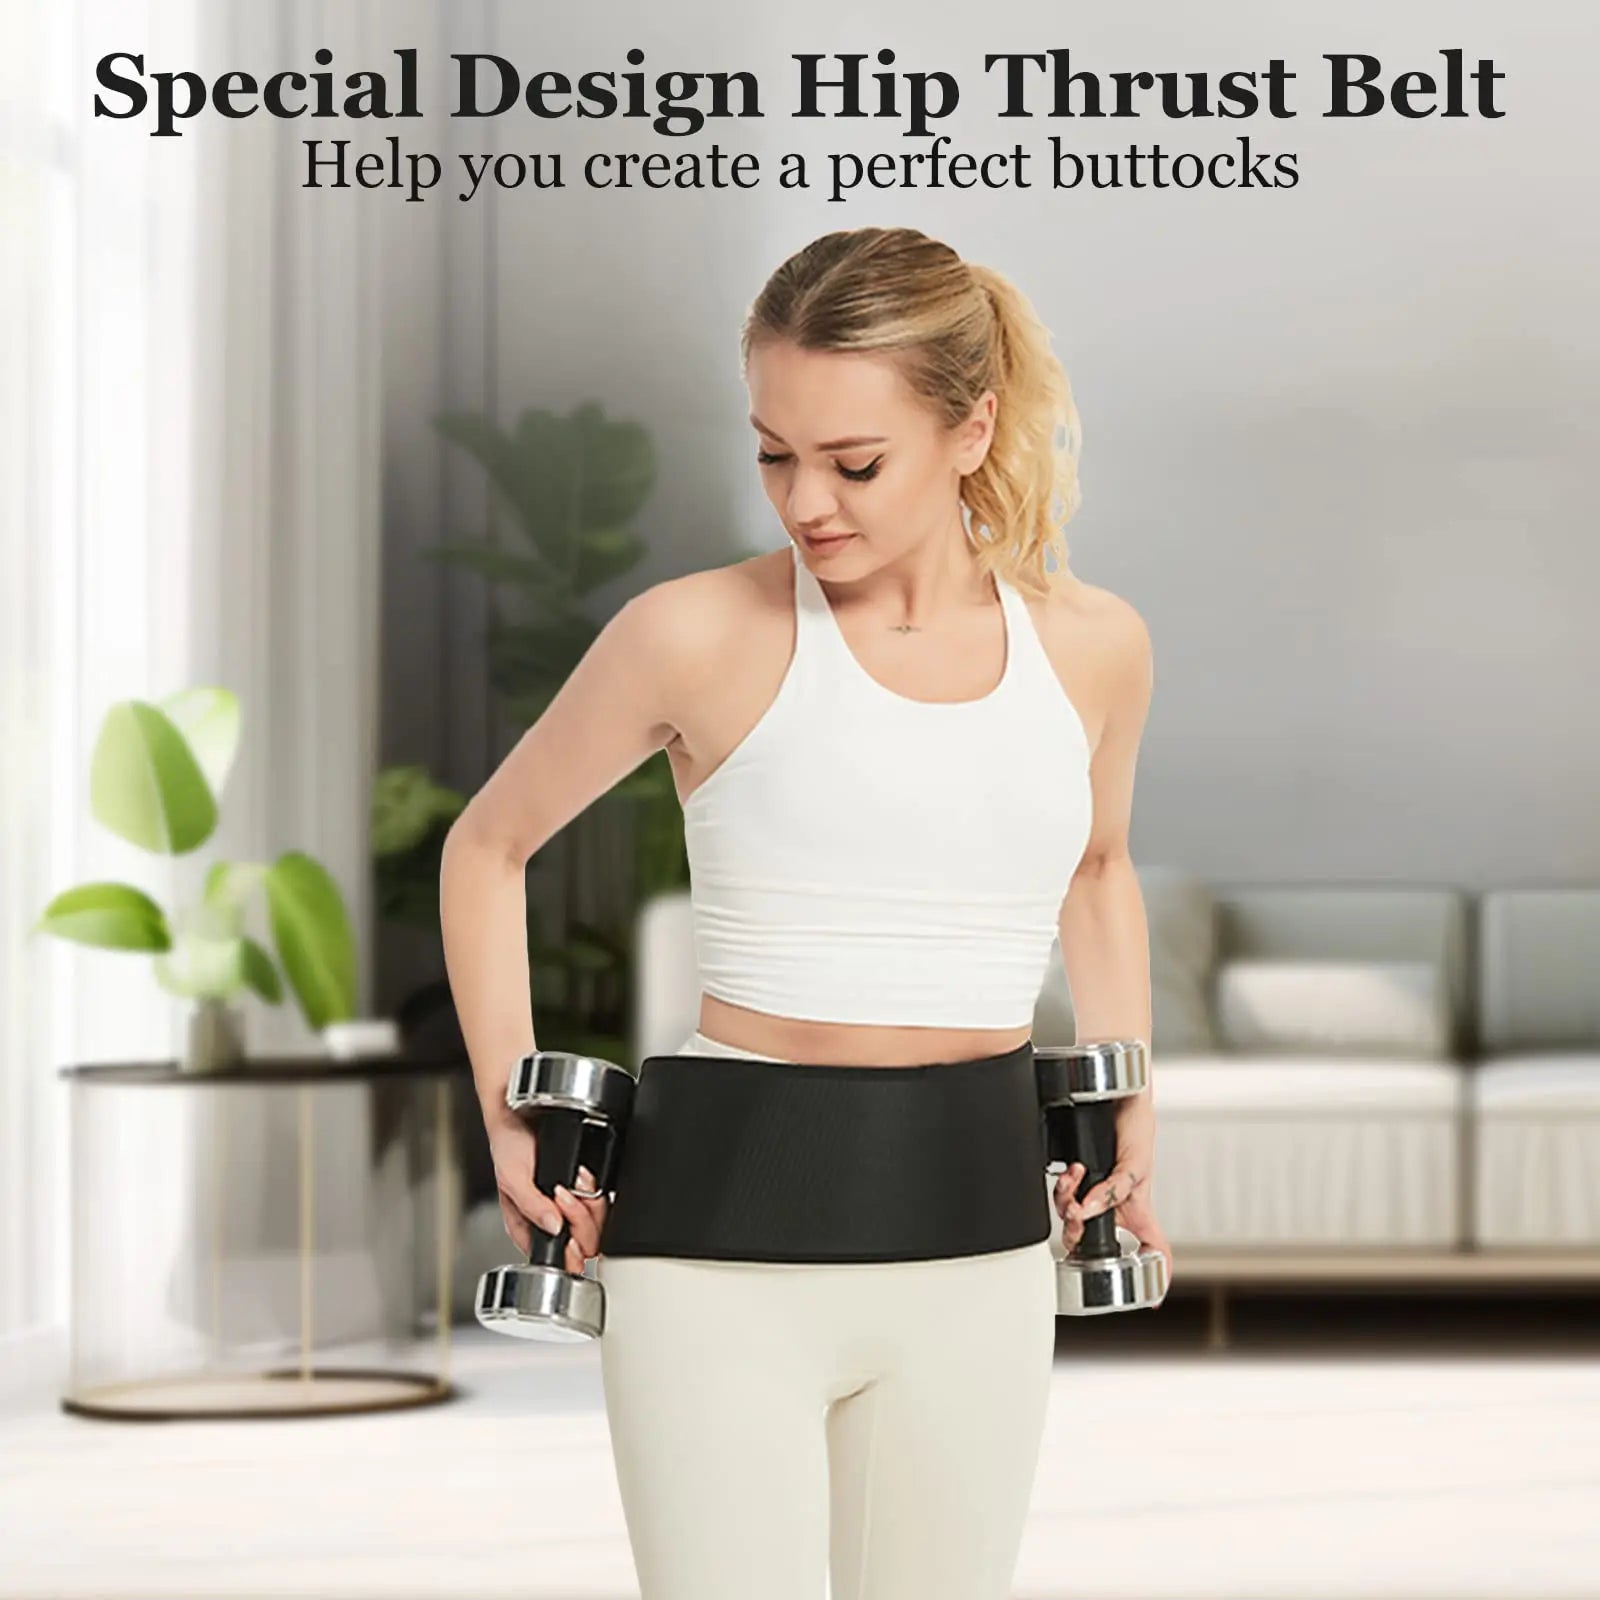 Ultimate Hip Thrust Belt for Home Workouts